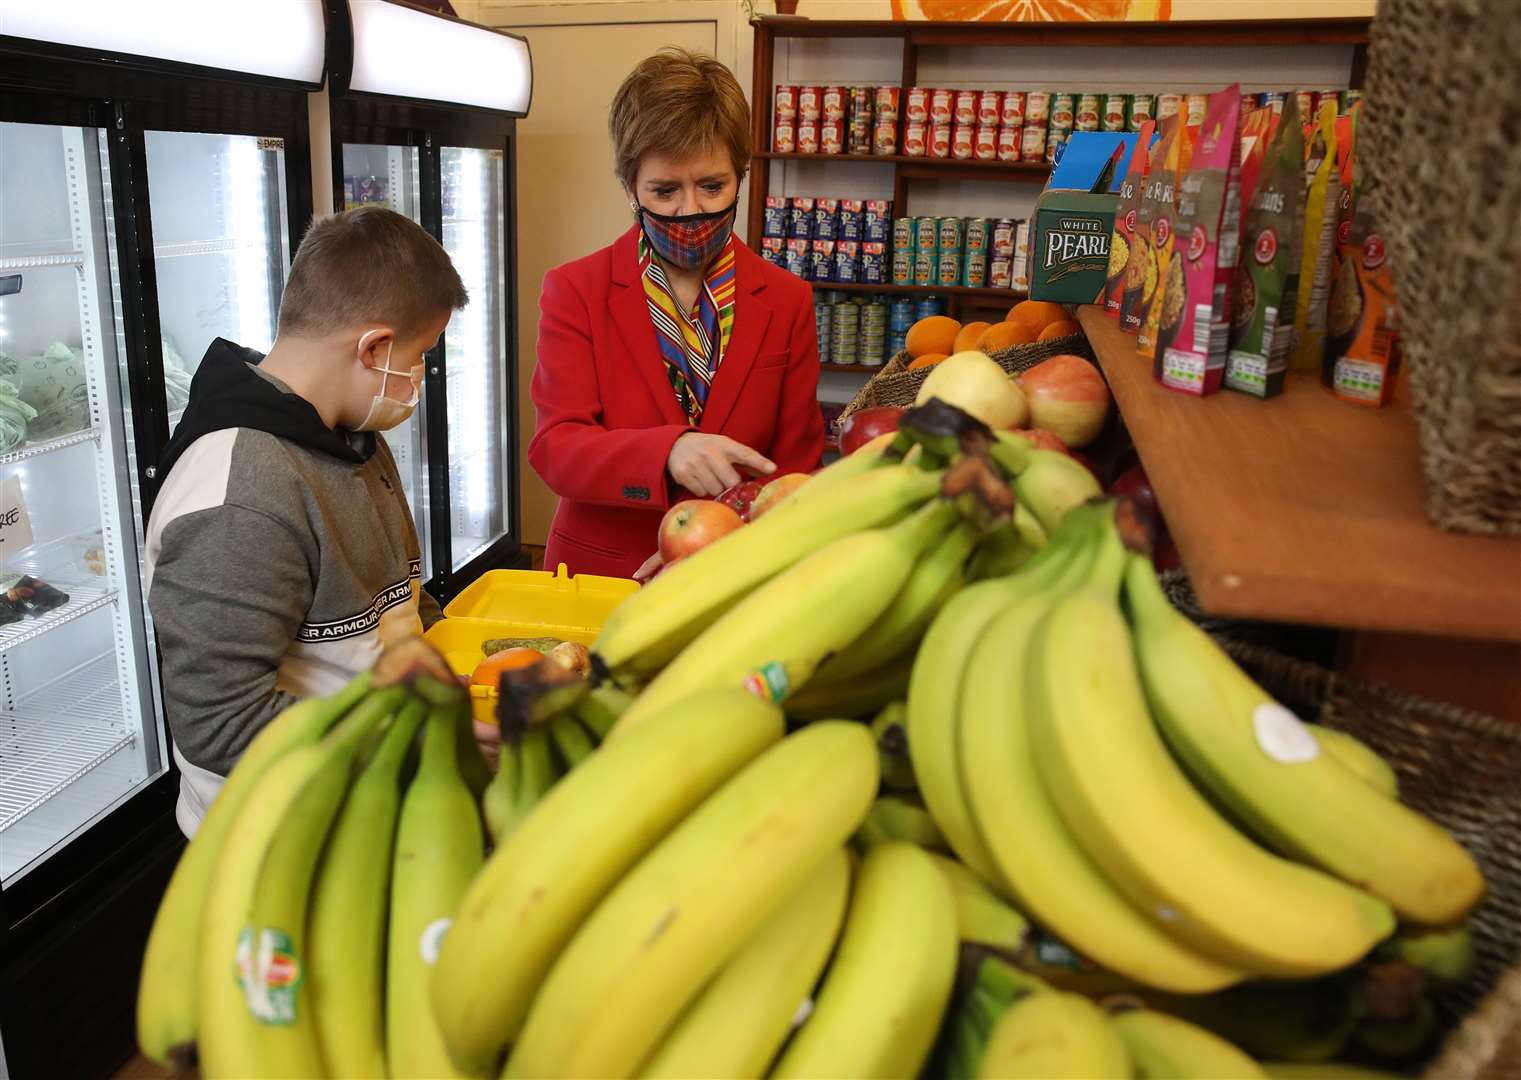 Ms Sturgeon said school meals boost children’s energy, concentration and behaviour (Andrew Milligan/PA